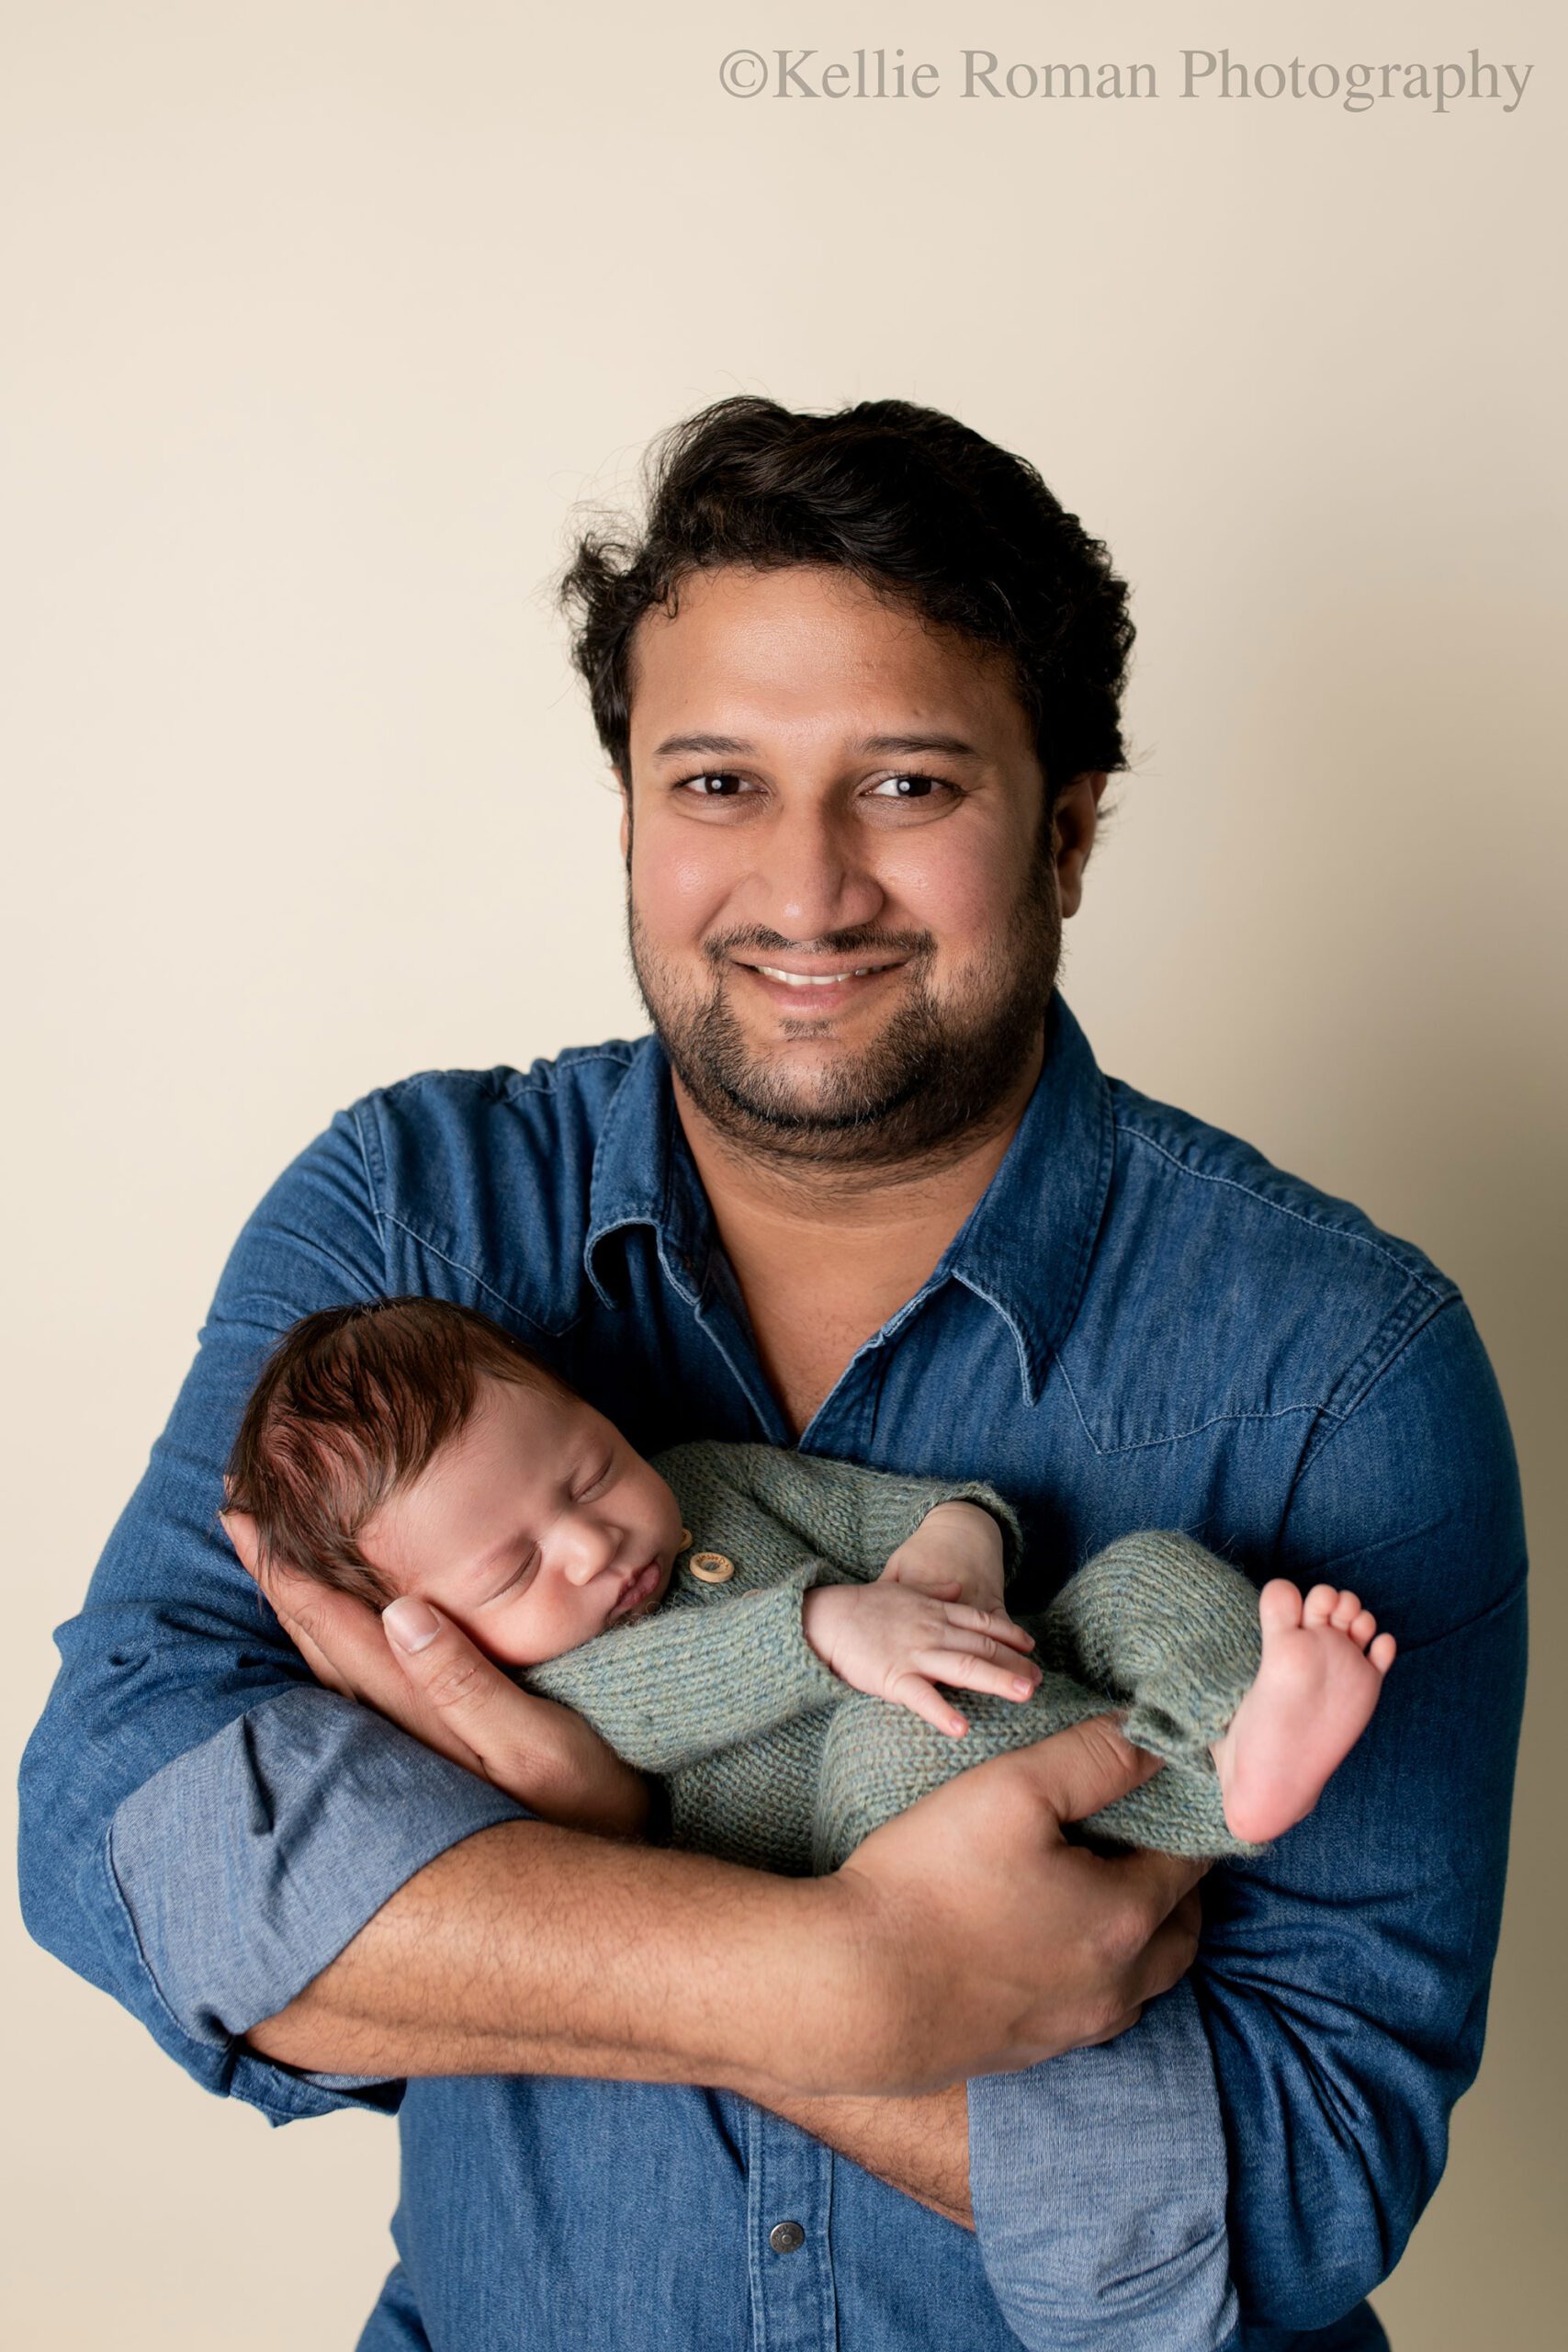 newborn photographer in milwaukee. a father is holding his newborn son and is looking and smiling at the camera. the baby boy is wearing a green knit romper and is sleeping in dads hands. the father has dark hair and a denim shirt on.